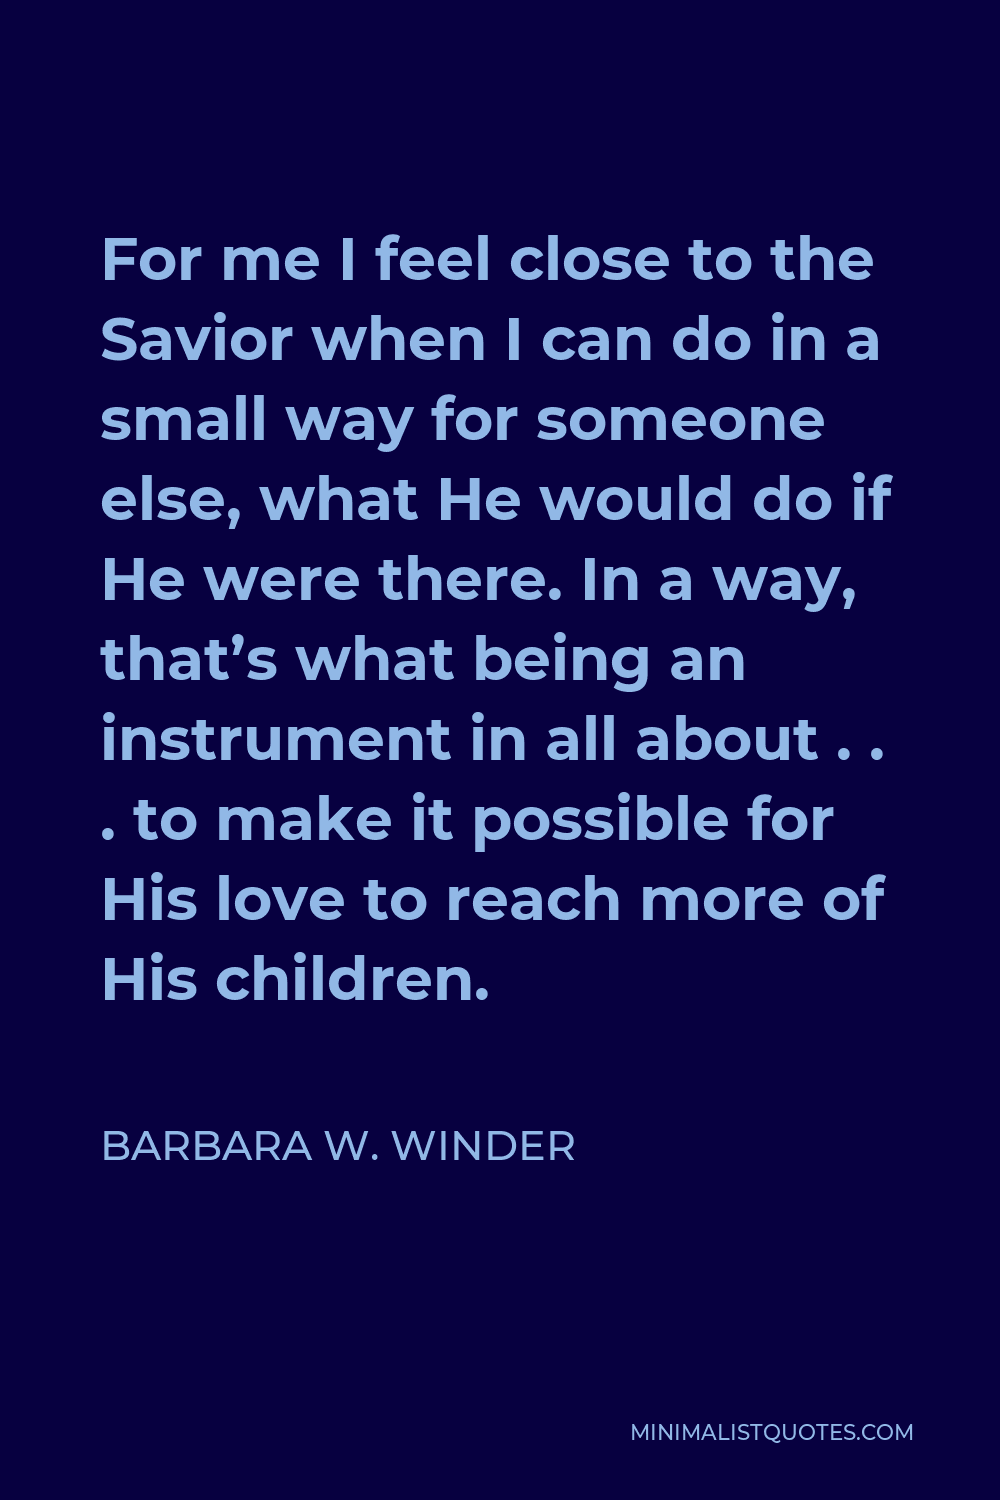 Barbara W. Winder Quote - For me I feel close to the Savior when I can do in a small way for someone else, what He would do if He were there. In a way, that’s what being an instrument in all about . . . to make it possible for His love to reach more of His children.